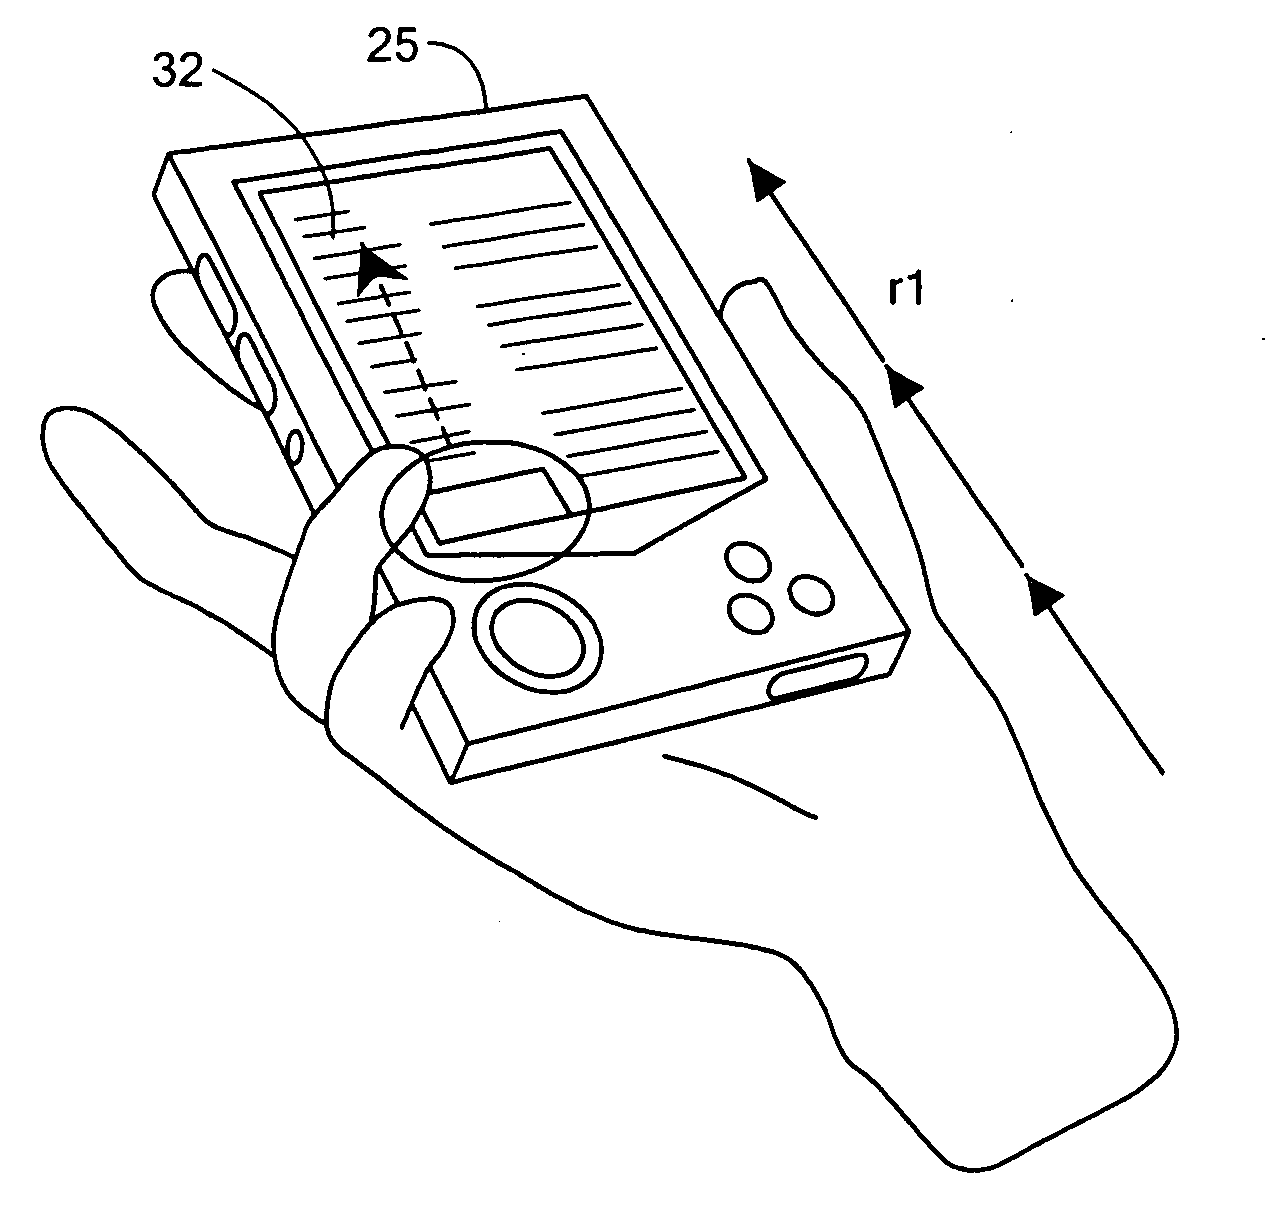 Air-writing and motion sensing input for portable devices